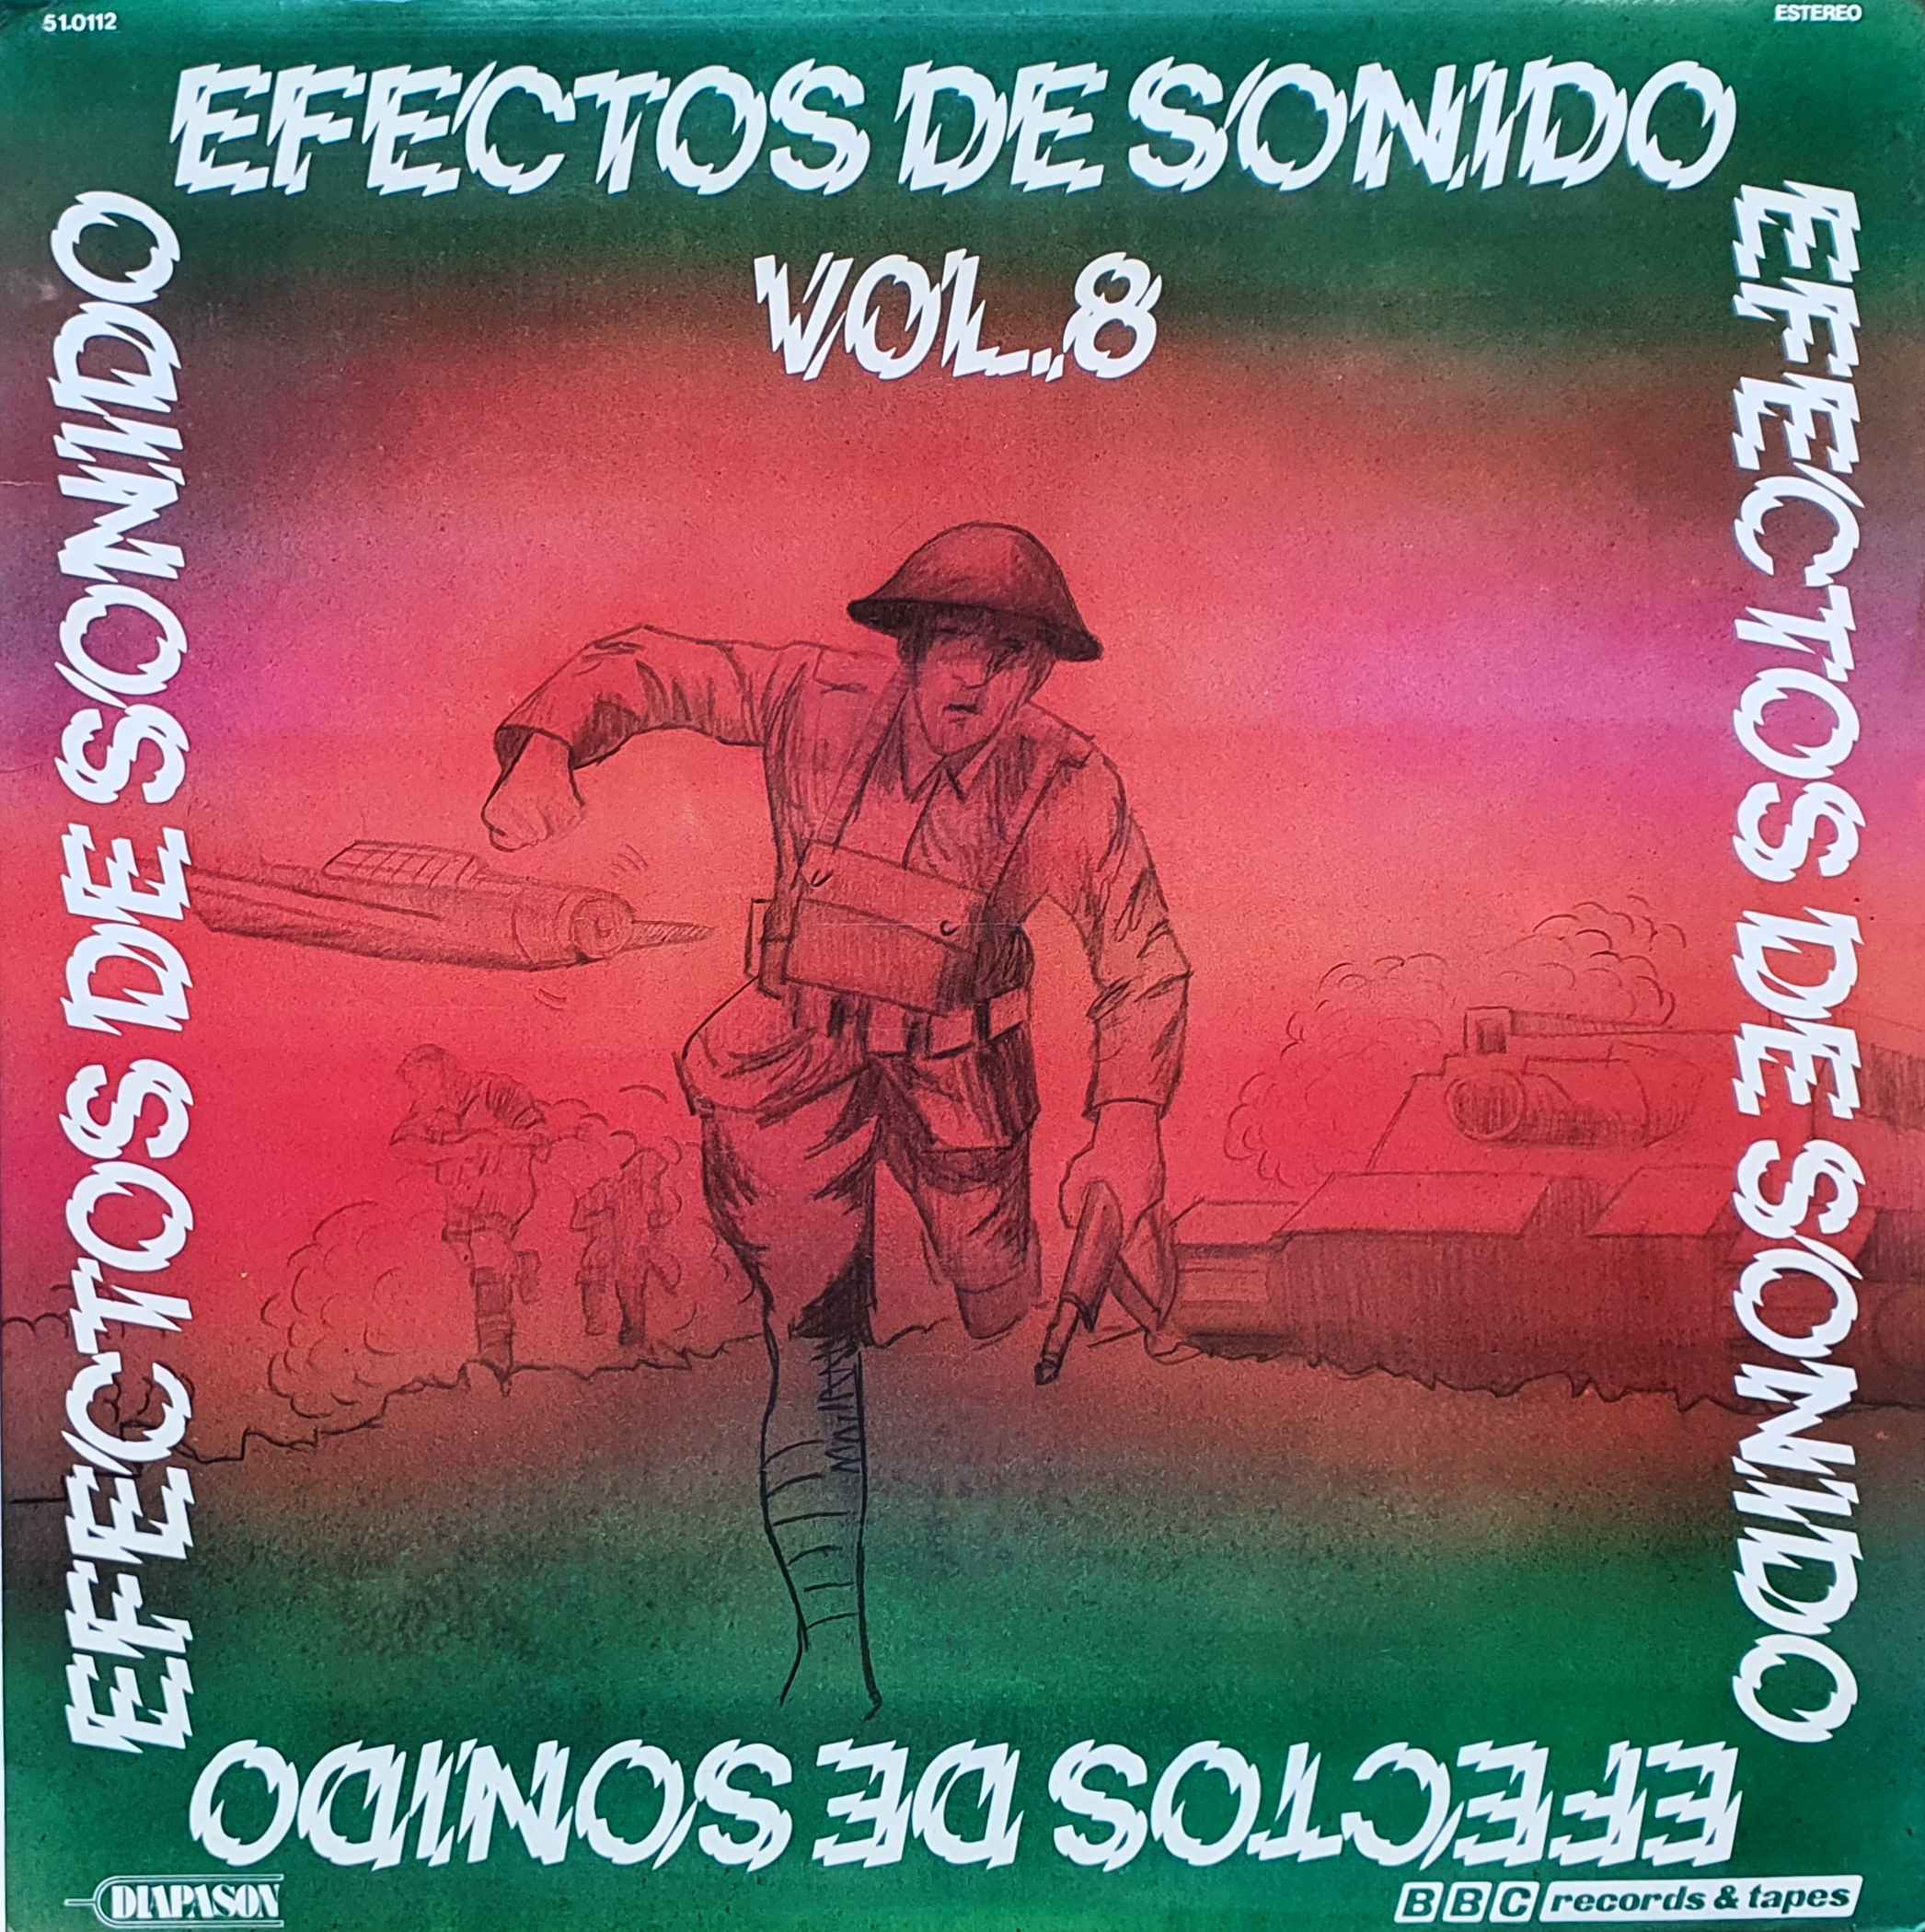 Picture of 51.0112 Efectos de sonido No 8 by artist Various from the BBC albums - Records and Tapes library